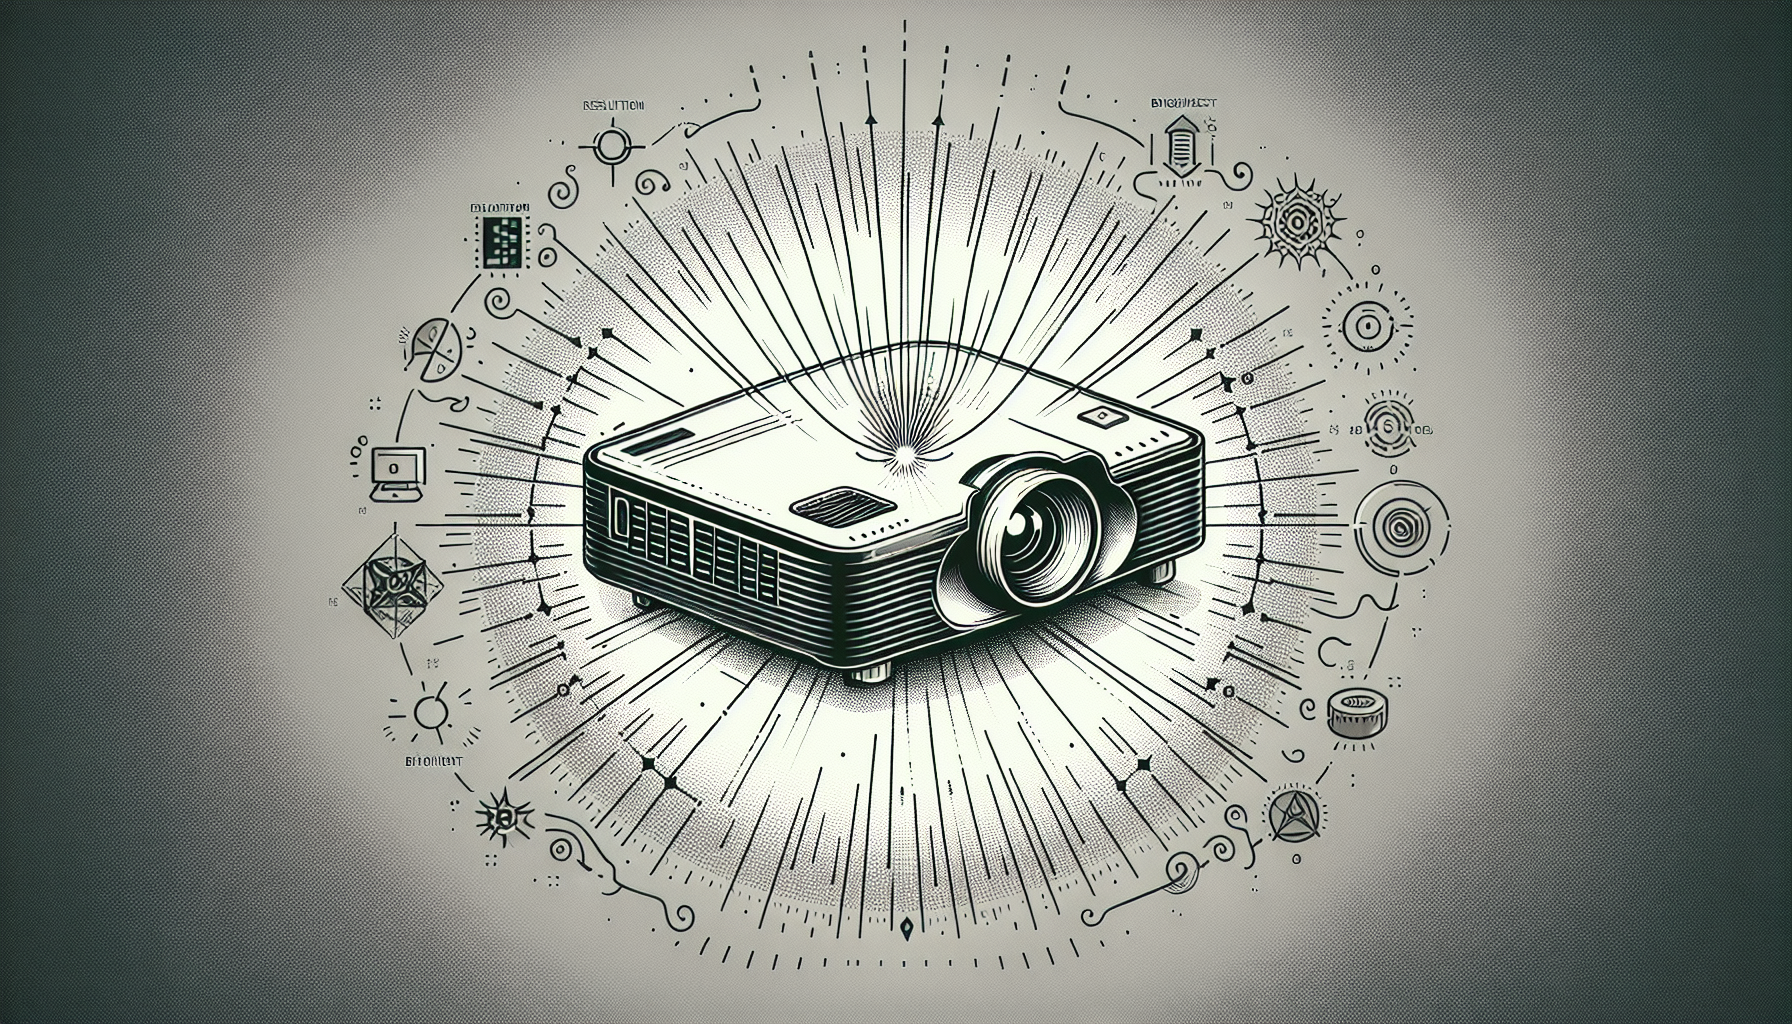 An artistic illustration depicting the key specifications of a portable projector, including resolution, brightness, and contrast ratio.